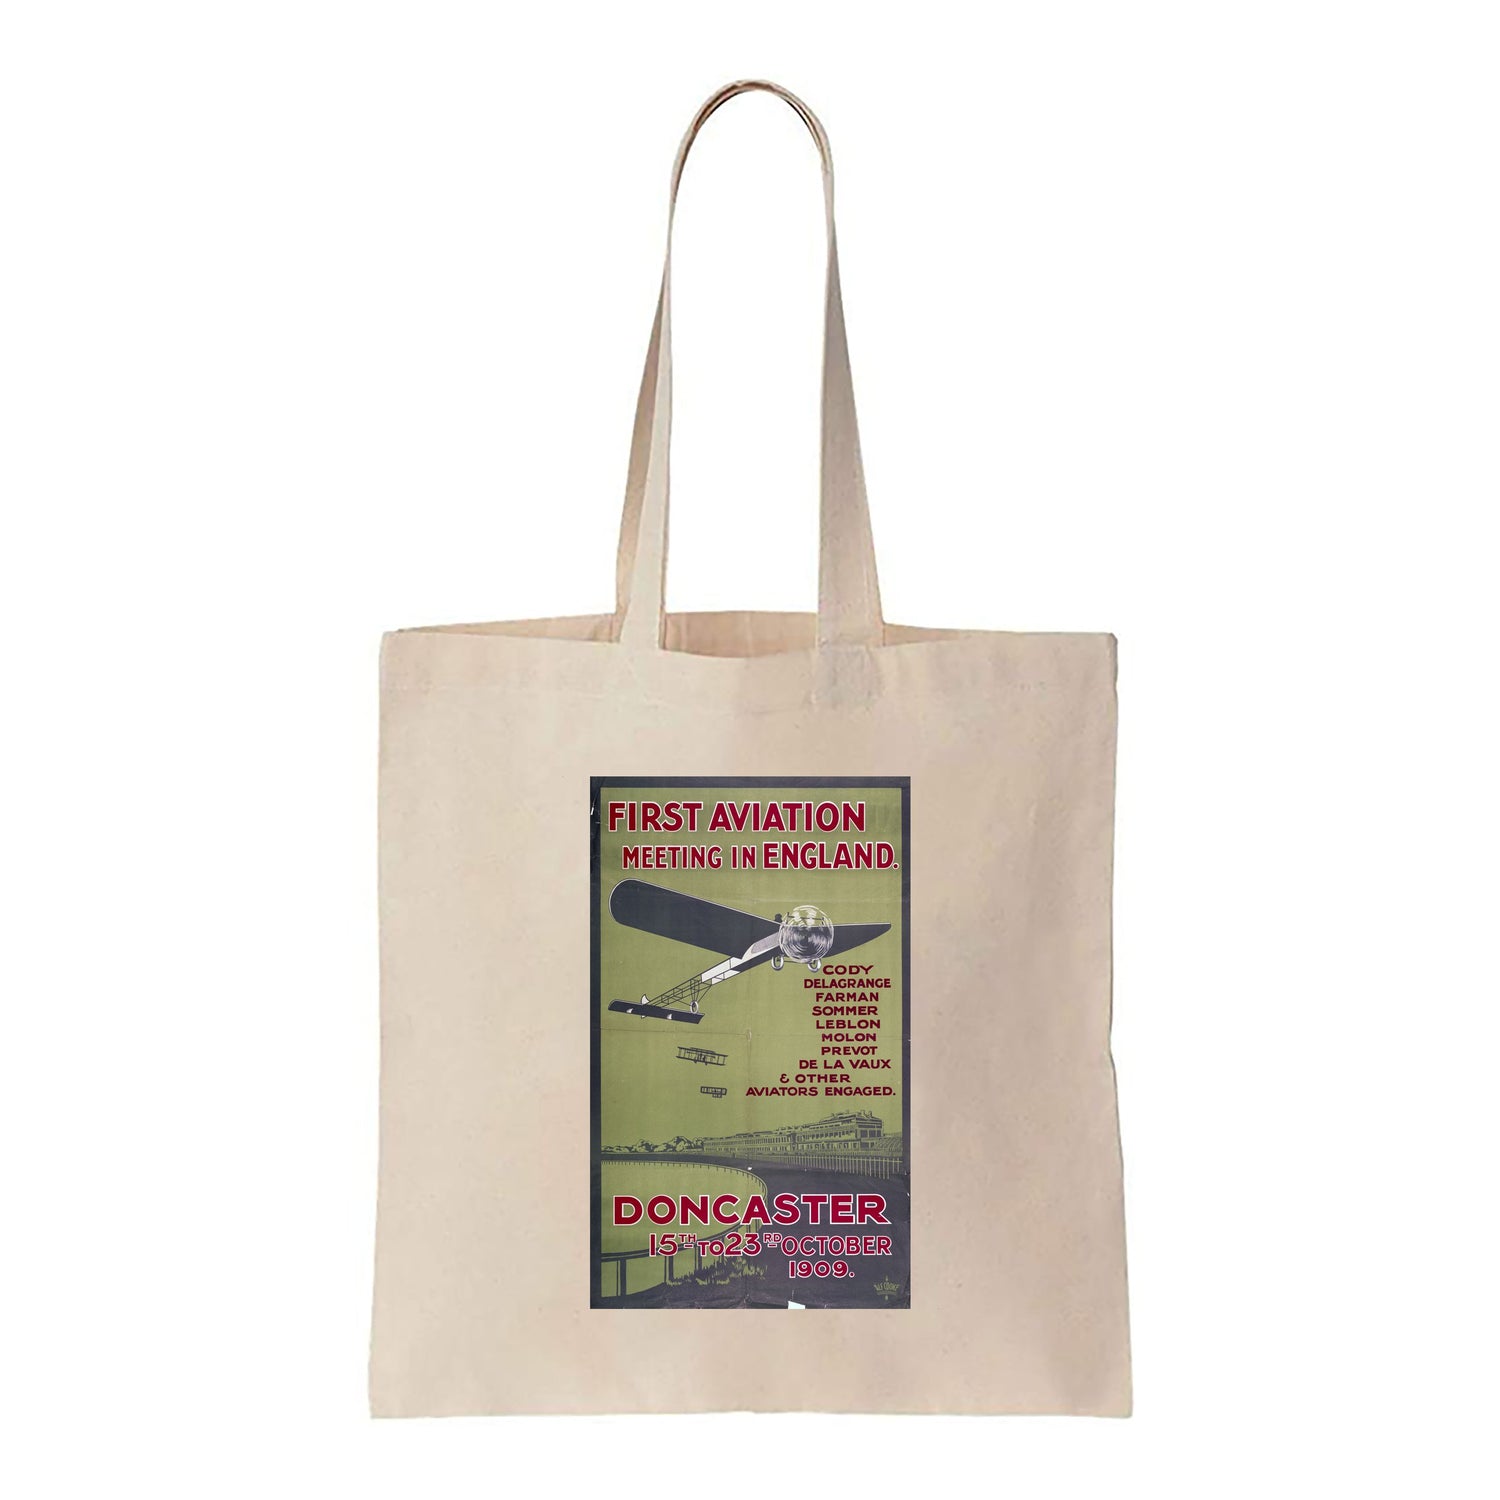 First Aviation Meeting in England, Doncaster - Canvas Tote Bag